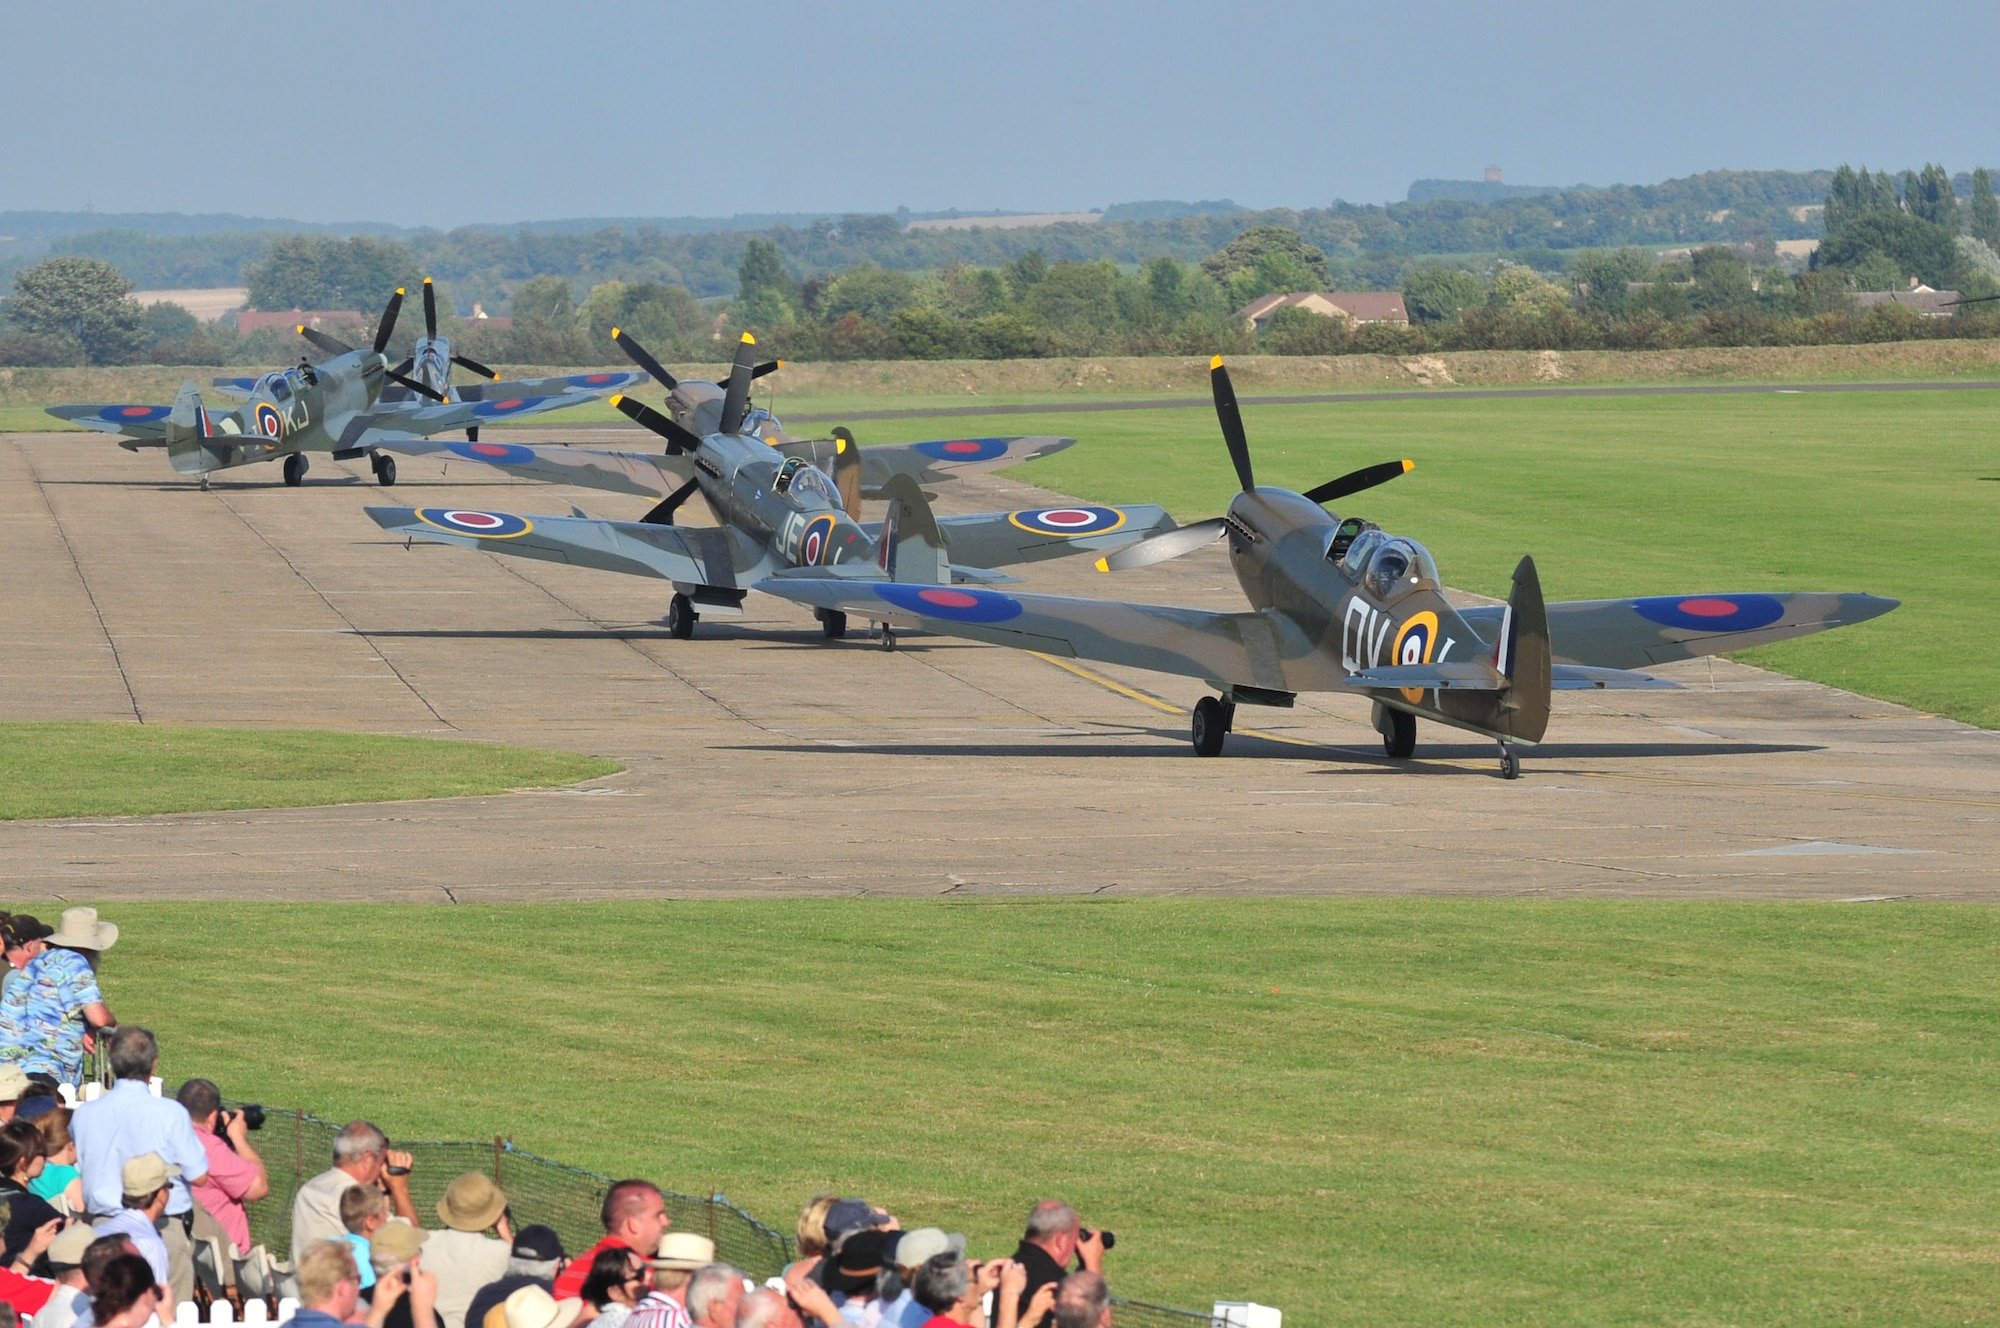 The world’s largest formation of Supermarine Spitfire aircraft taxie down the runway during the Duxford Air Show, at a village in Cambridgeshire, England, Sept. 3, 2011. The Supermarine Spitfire was the only allied aircraft in production throughout the duration of the war. Today, a replica of the aircraft stands outside the Spitfire Pub here on Seymour Johnson Air Force Base, N.C., in honor of those who gave their lives during the Battle of Britain. (U.S. Air Force photo by Senior Airman Marissa Tucker)